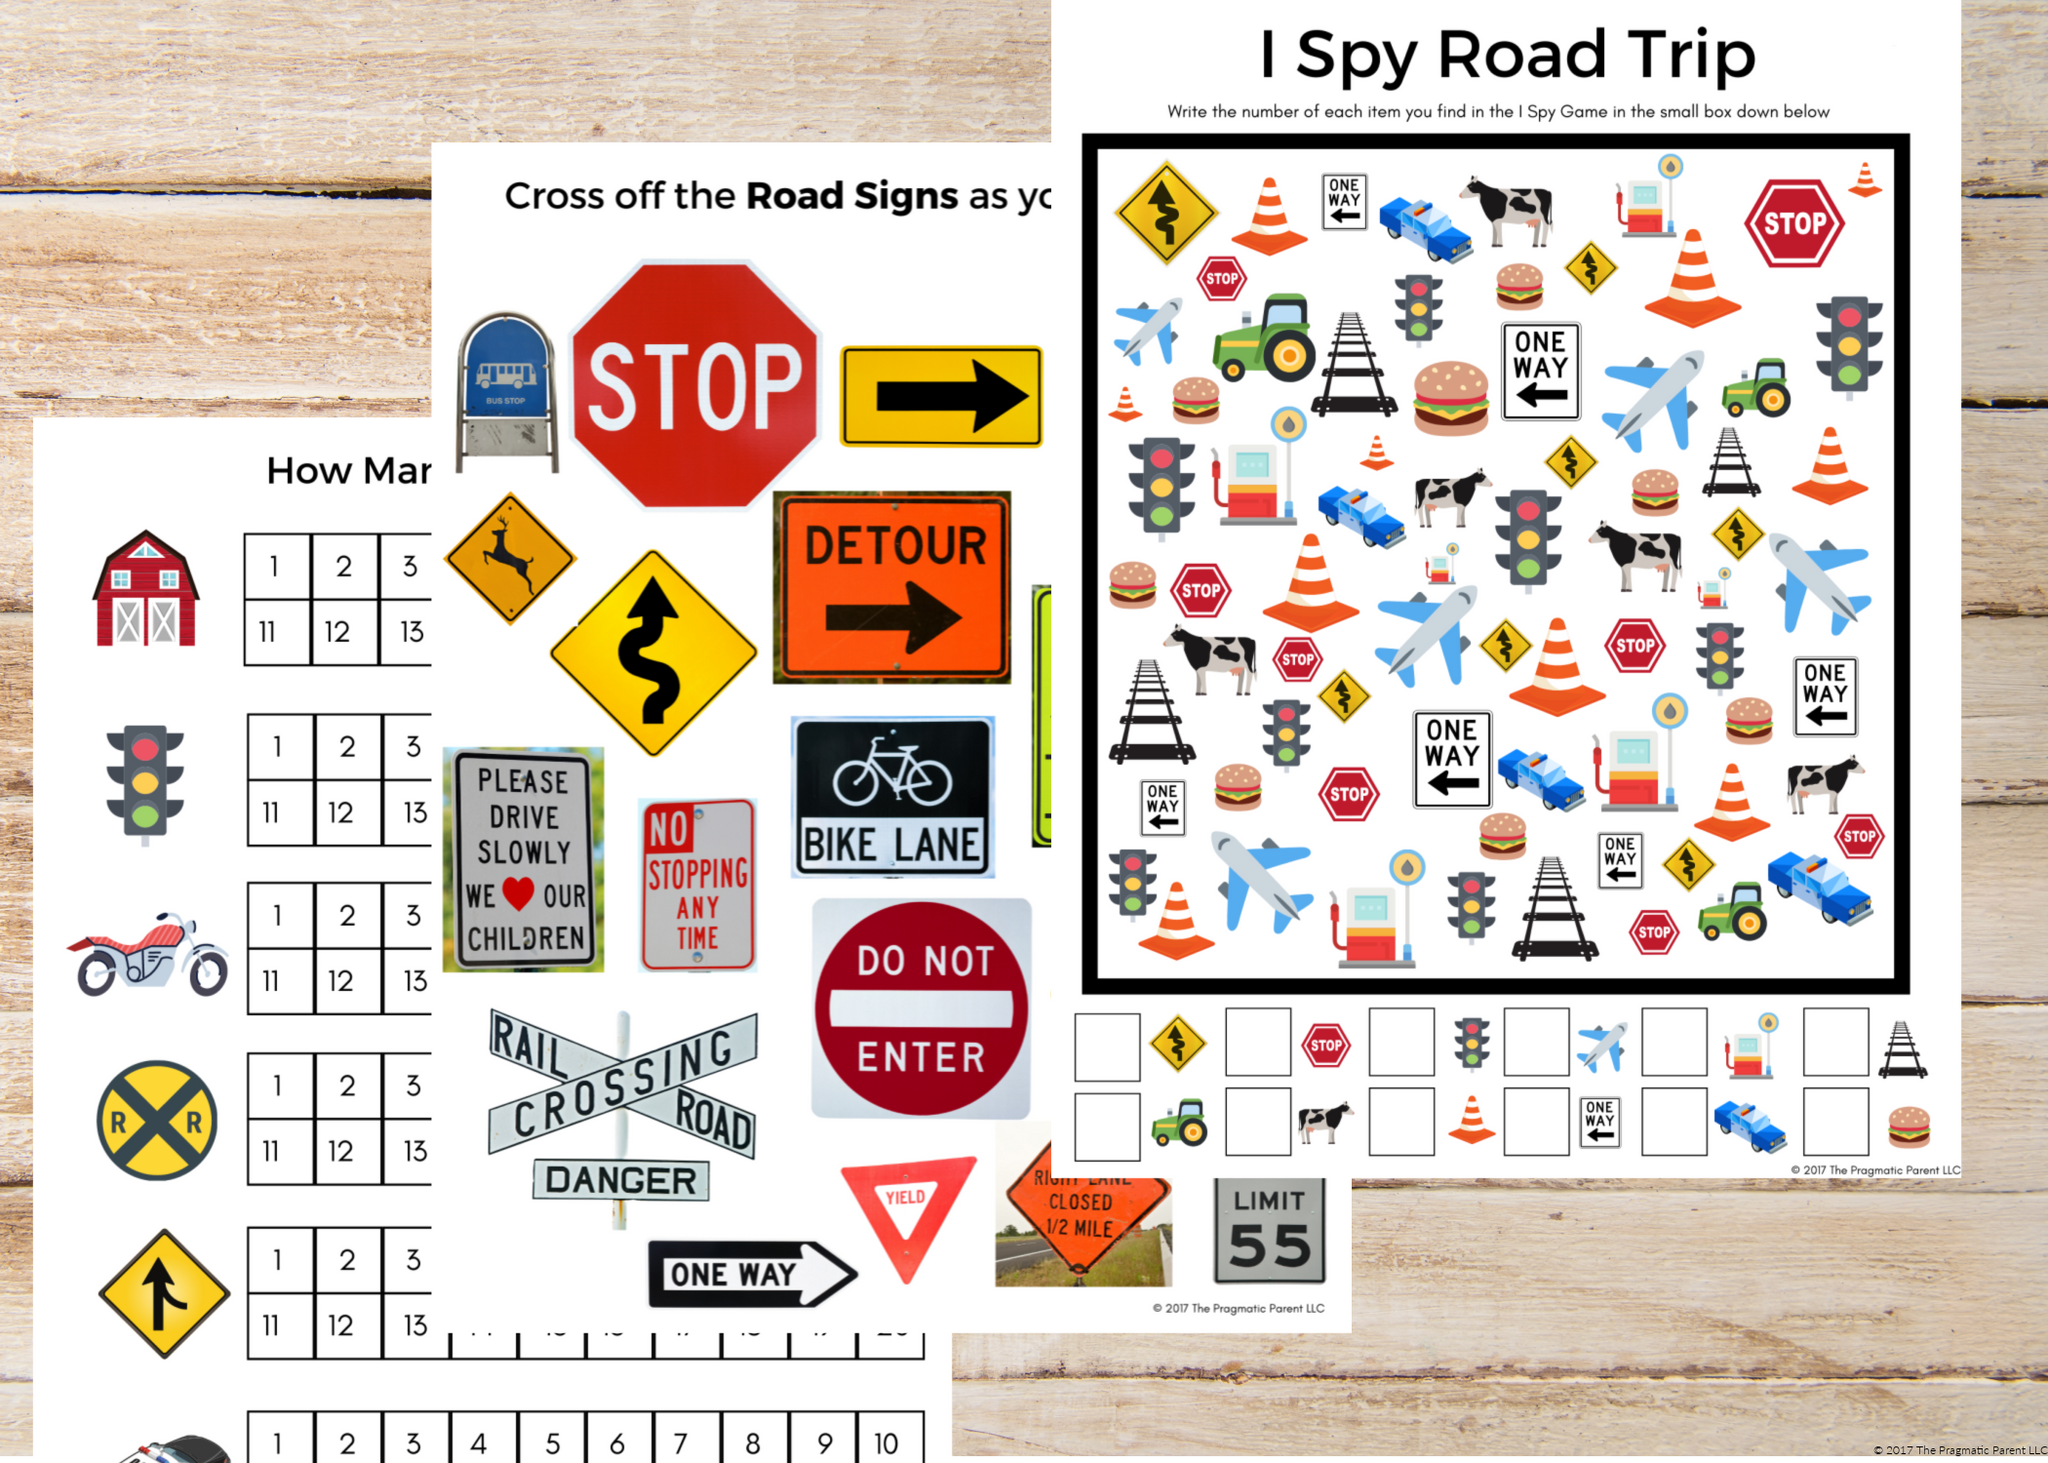 Road Trip Fun Activity Book for Children Ages 4-8 (GIFT FOR KIDS): 100+  Puzzles, Word Games, Word Scramble, Mazes, Shapes, Tic Tac Toe, Coloring